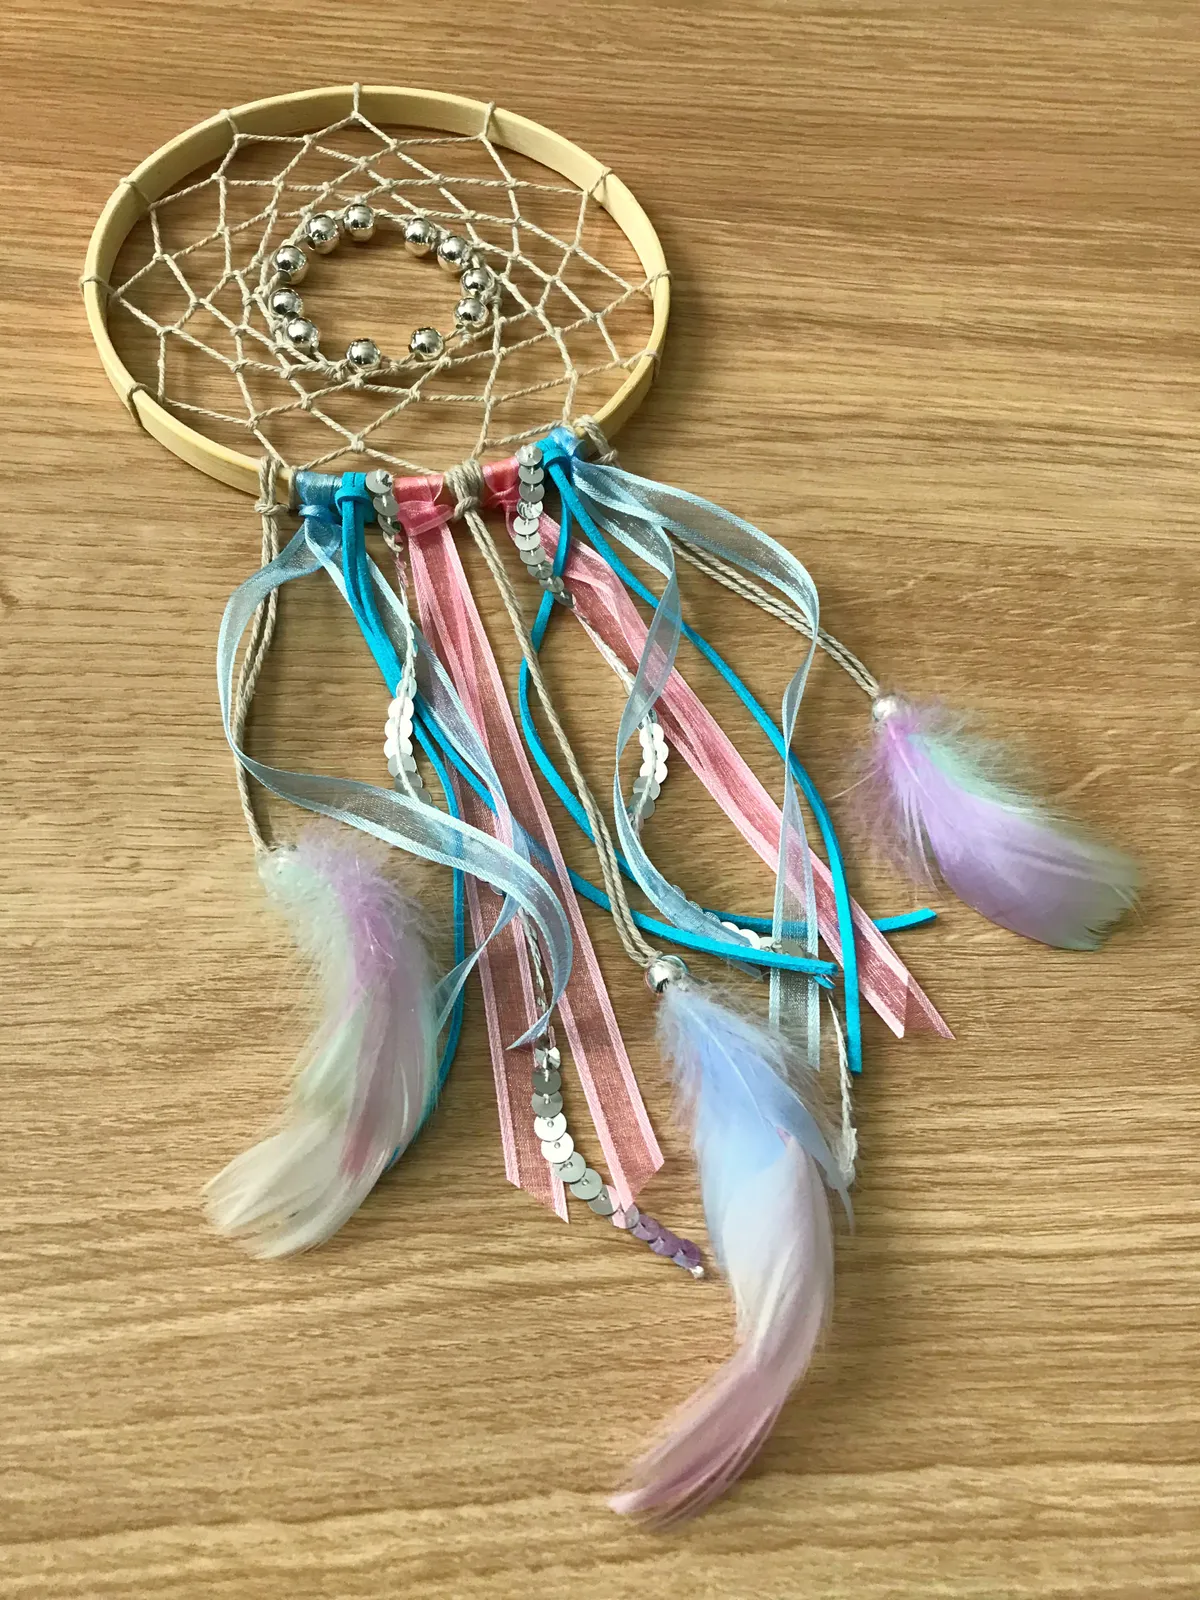 feather and ribbons hanging below a dreamcatcher